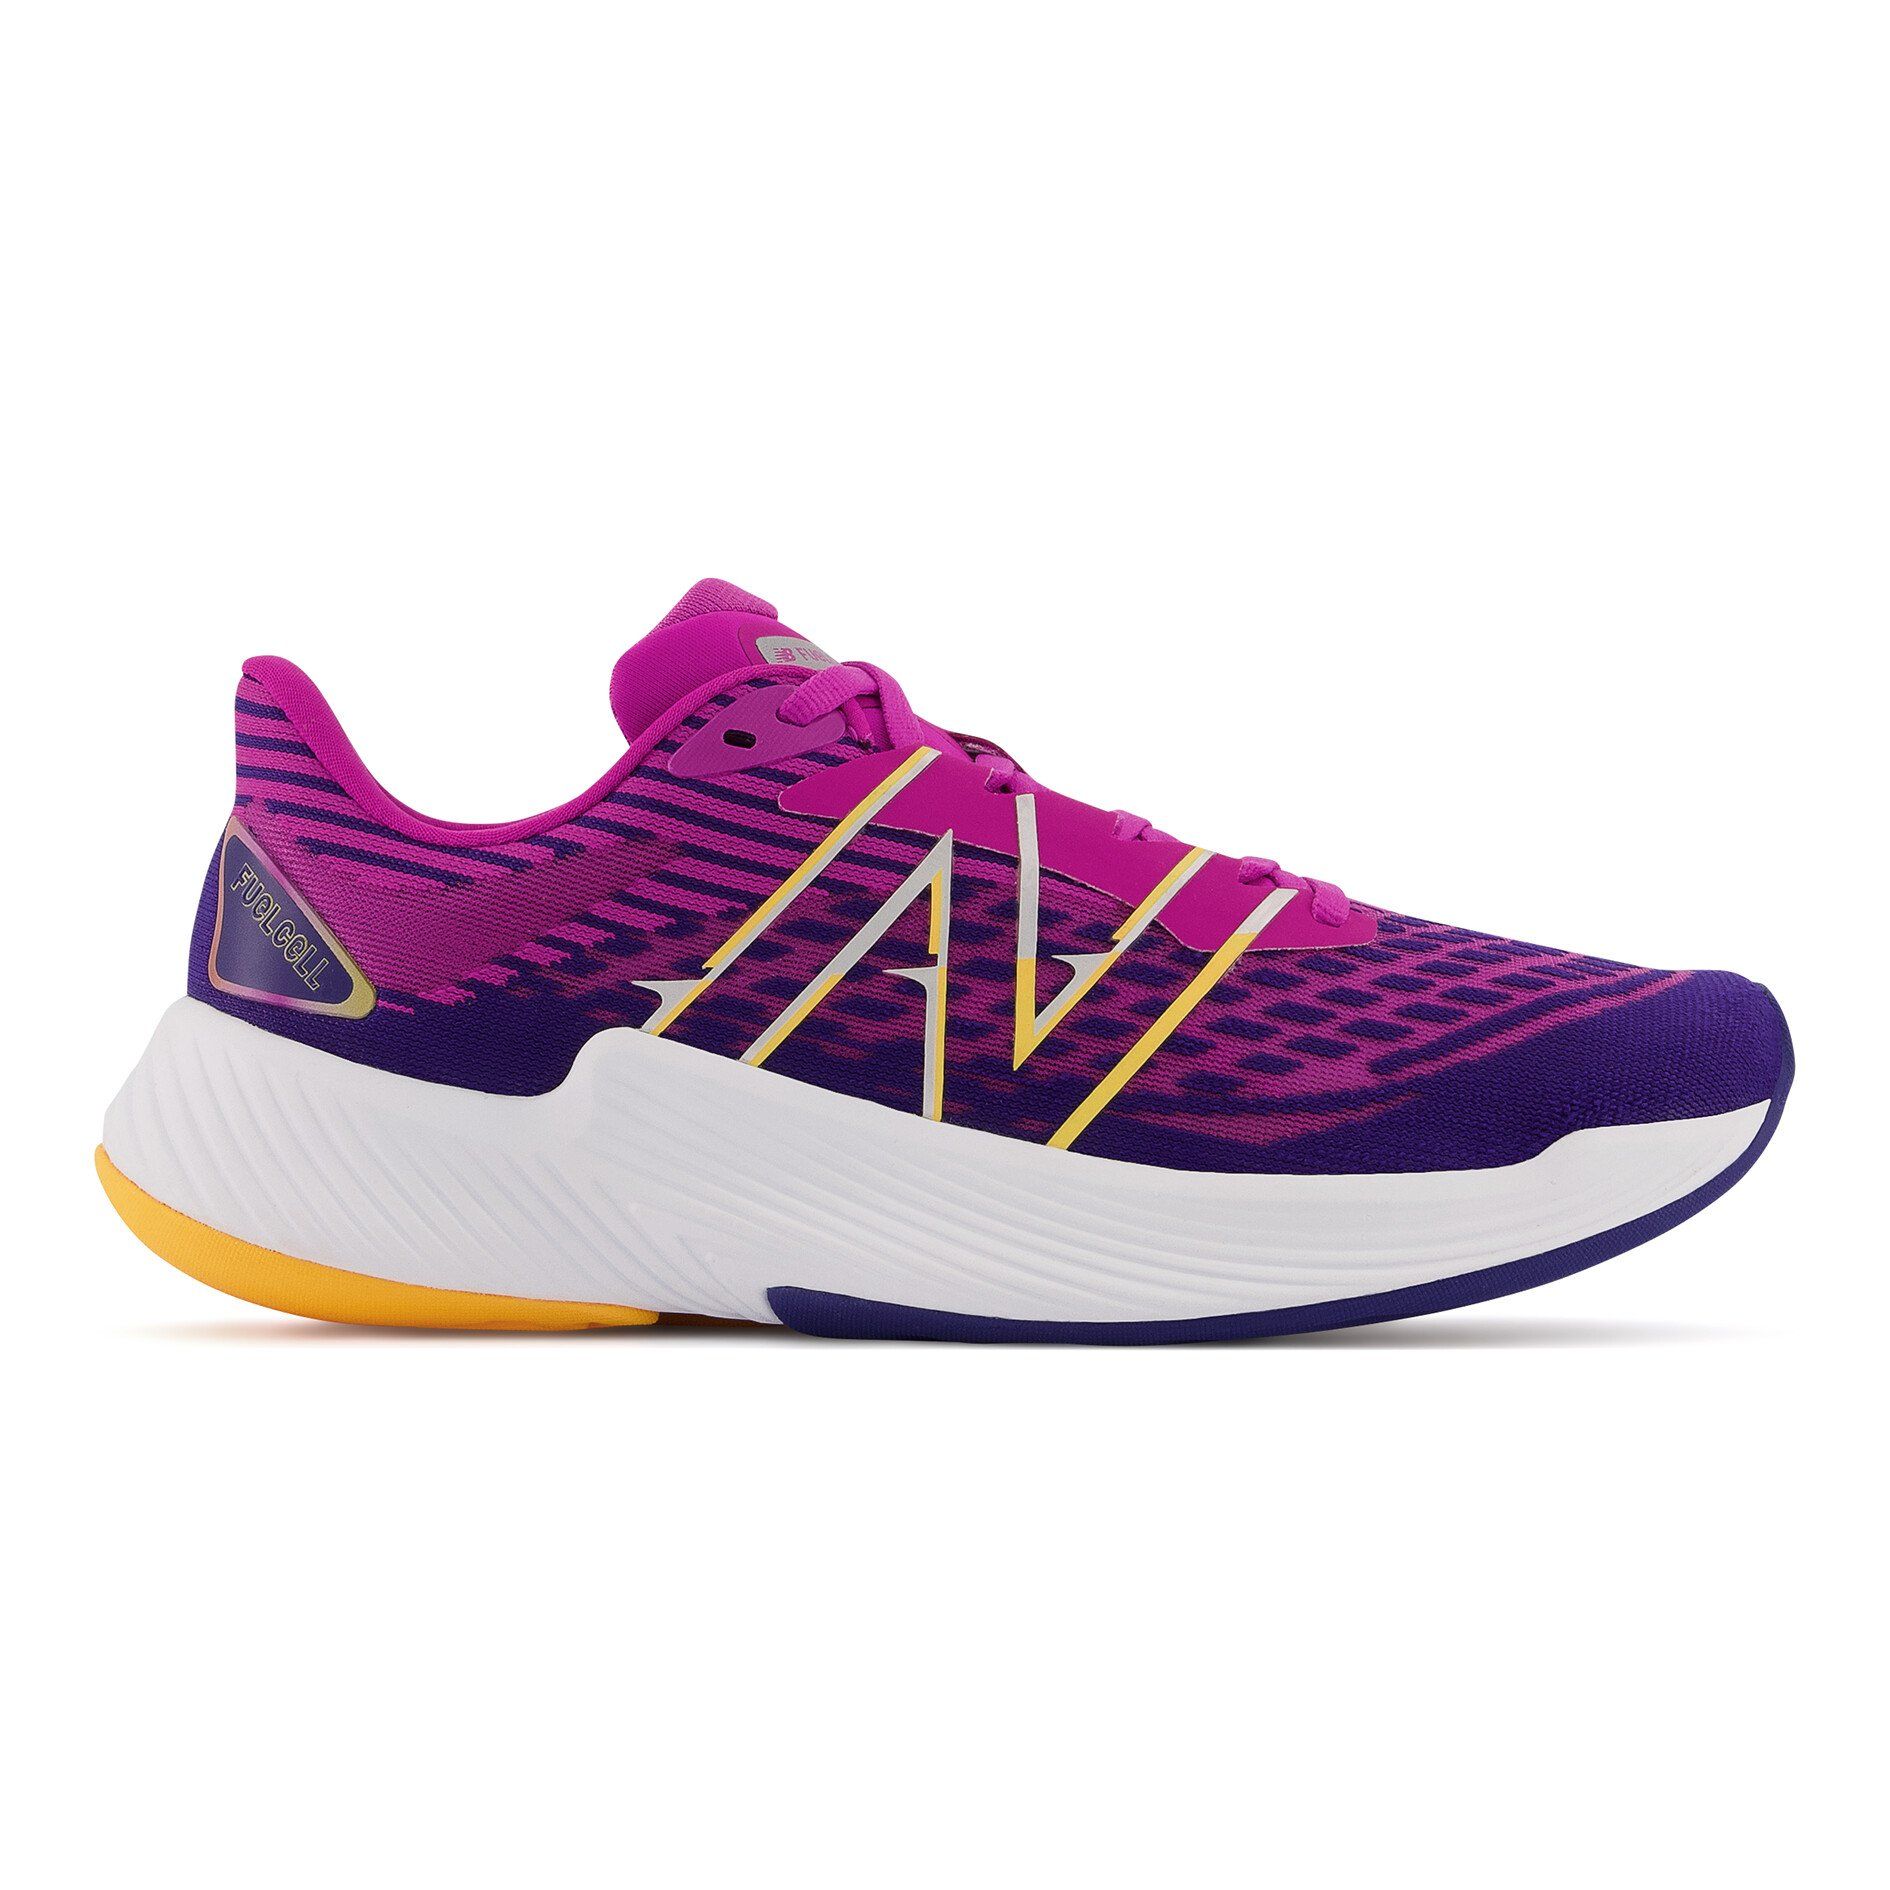 New Balance - WFCPZCN2 Fuel Cell Prism v2